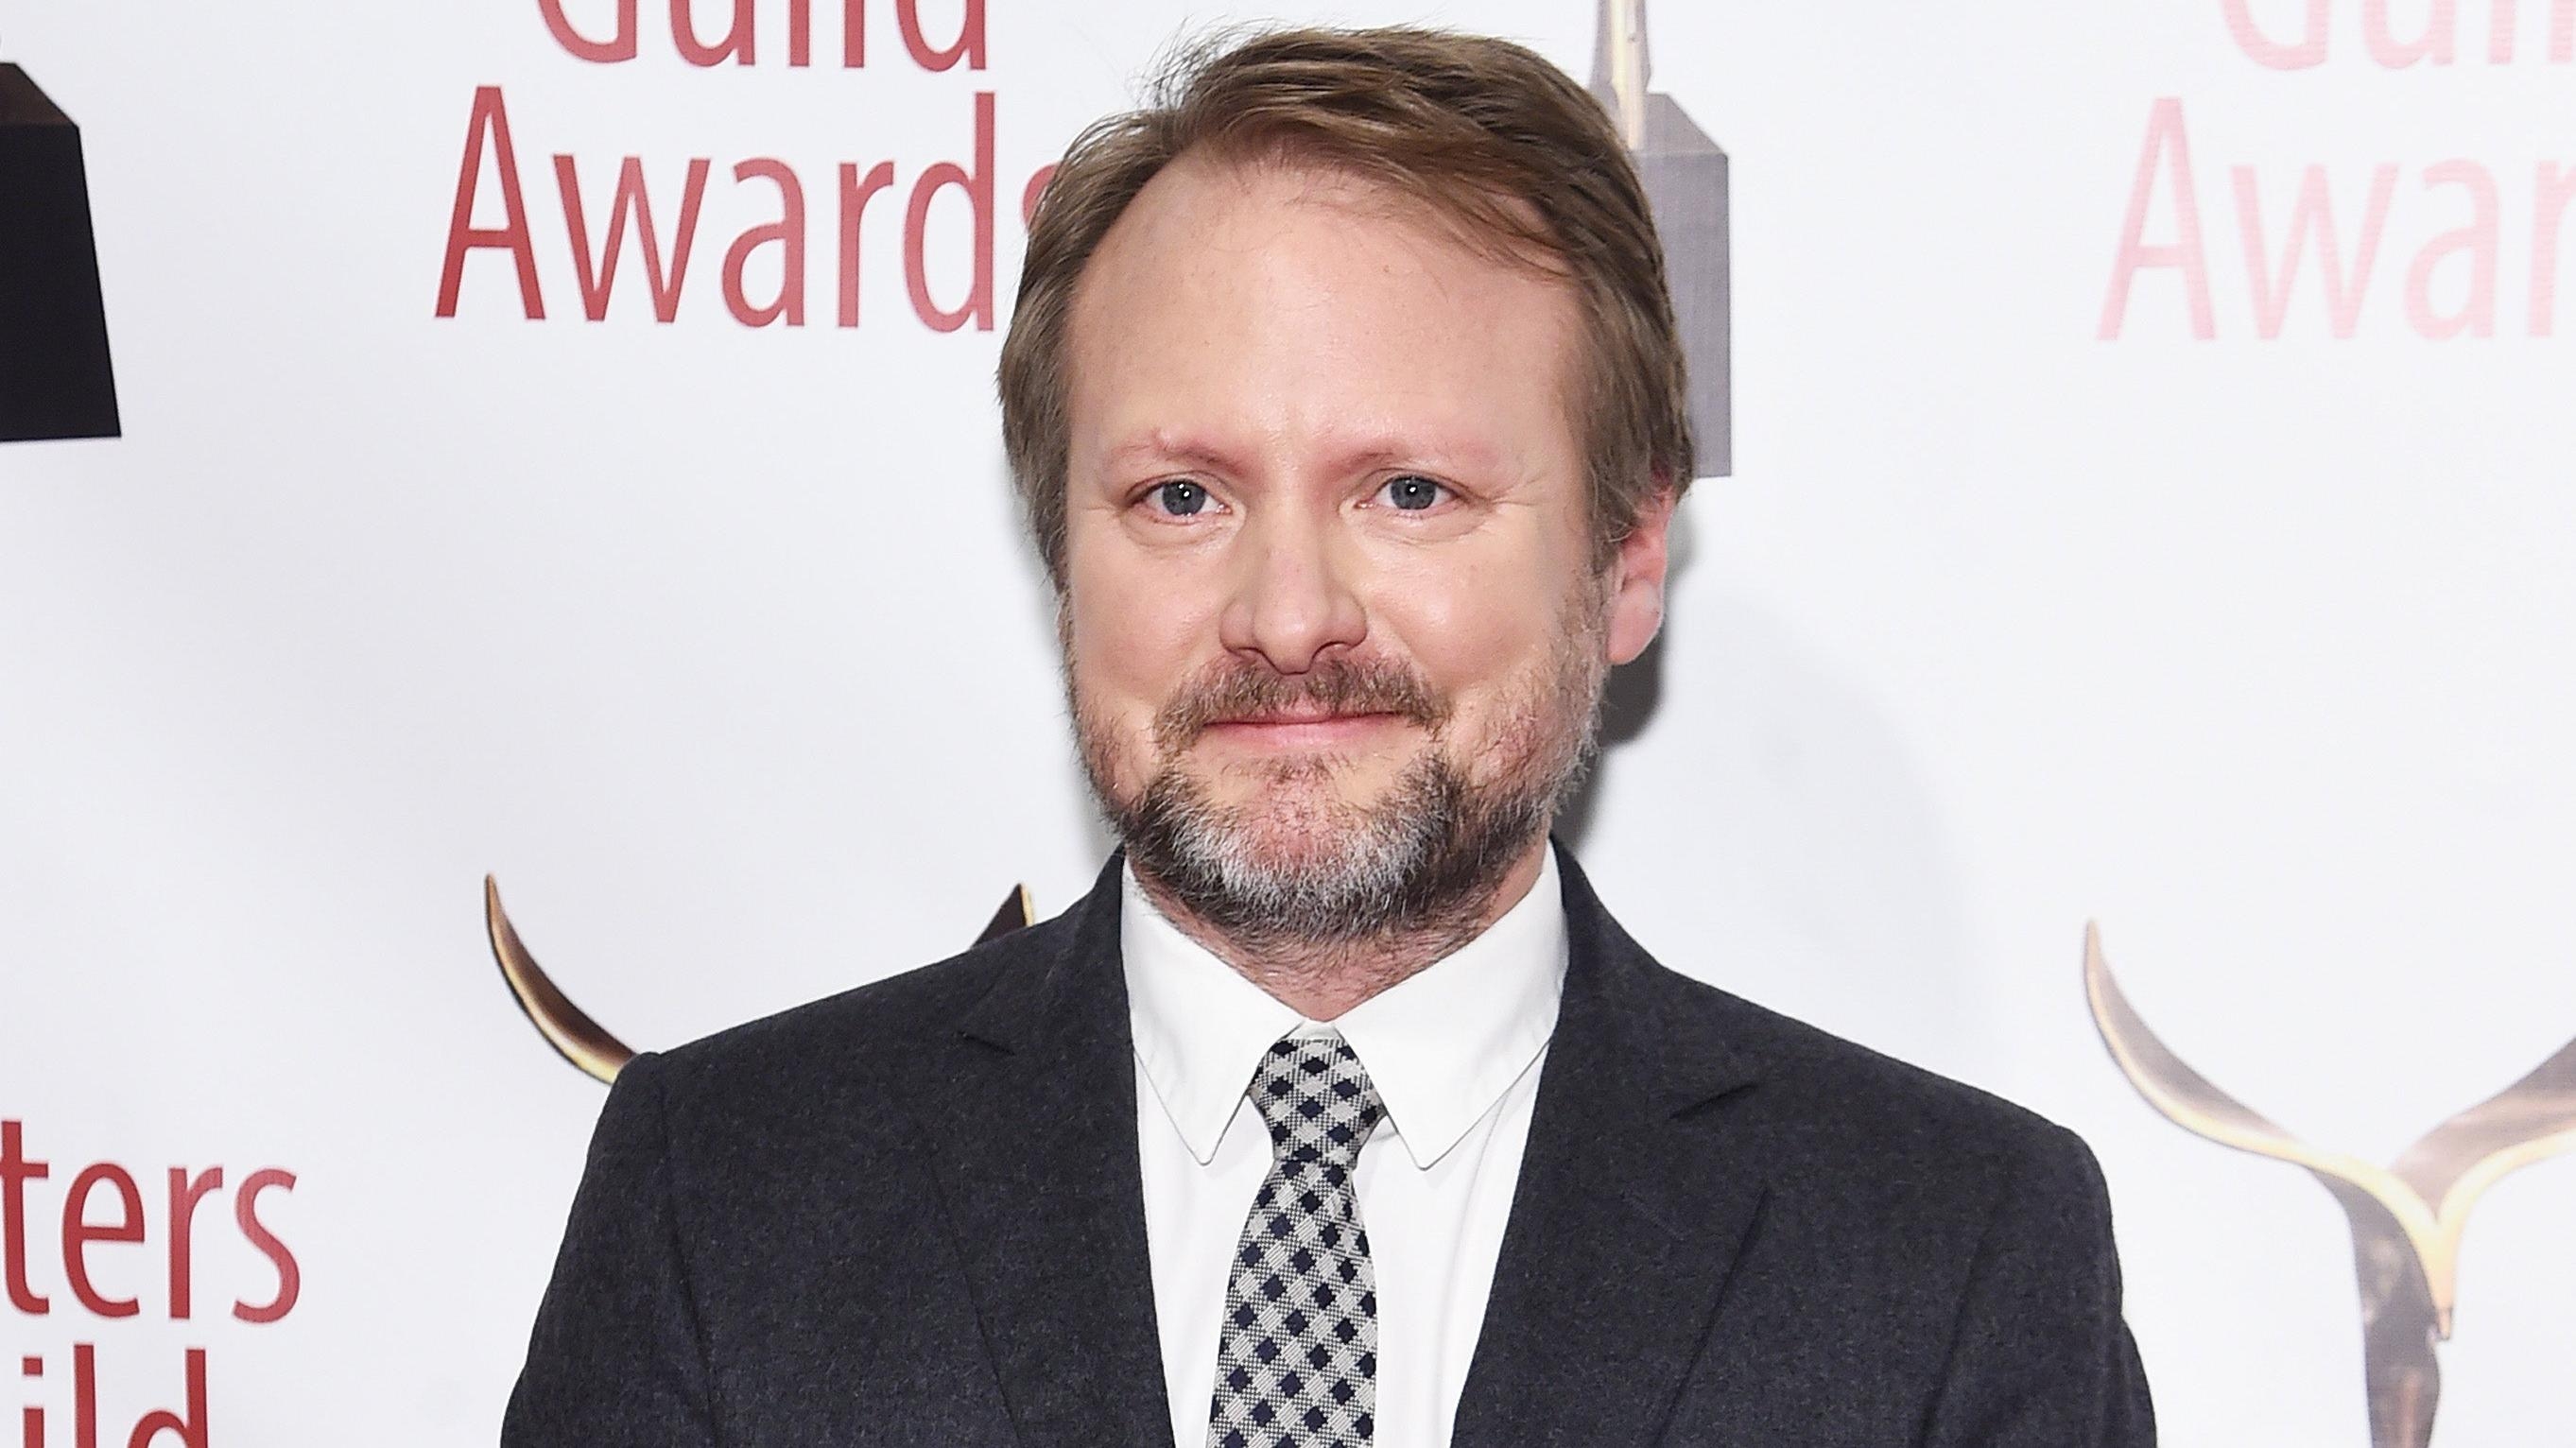 Rian Johnson’s Knives Out sequel finally has a mysterious title